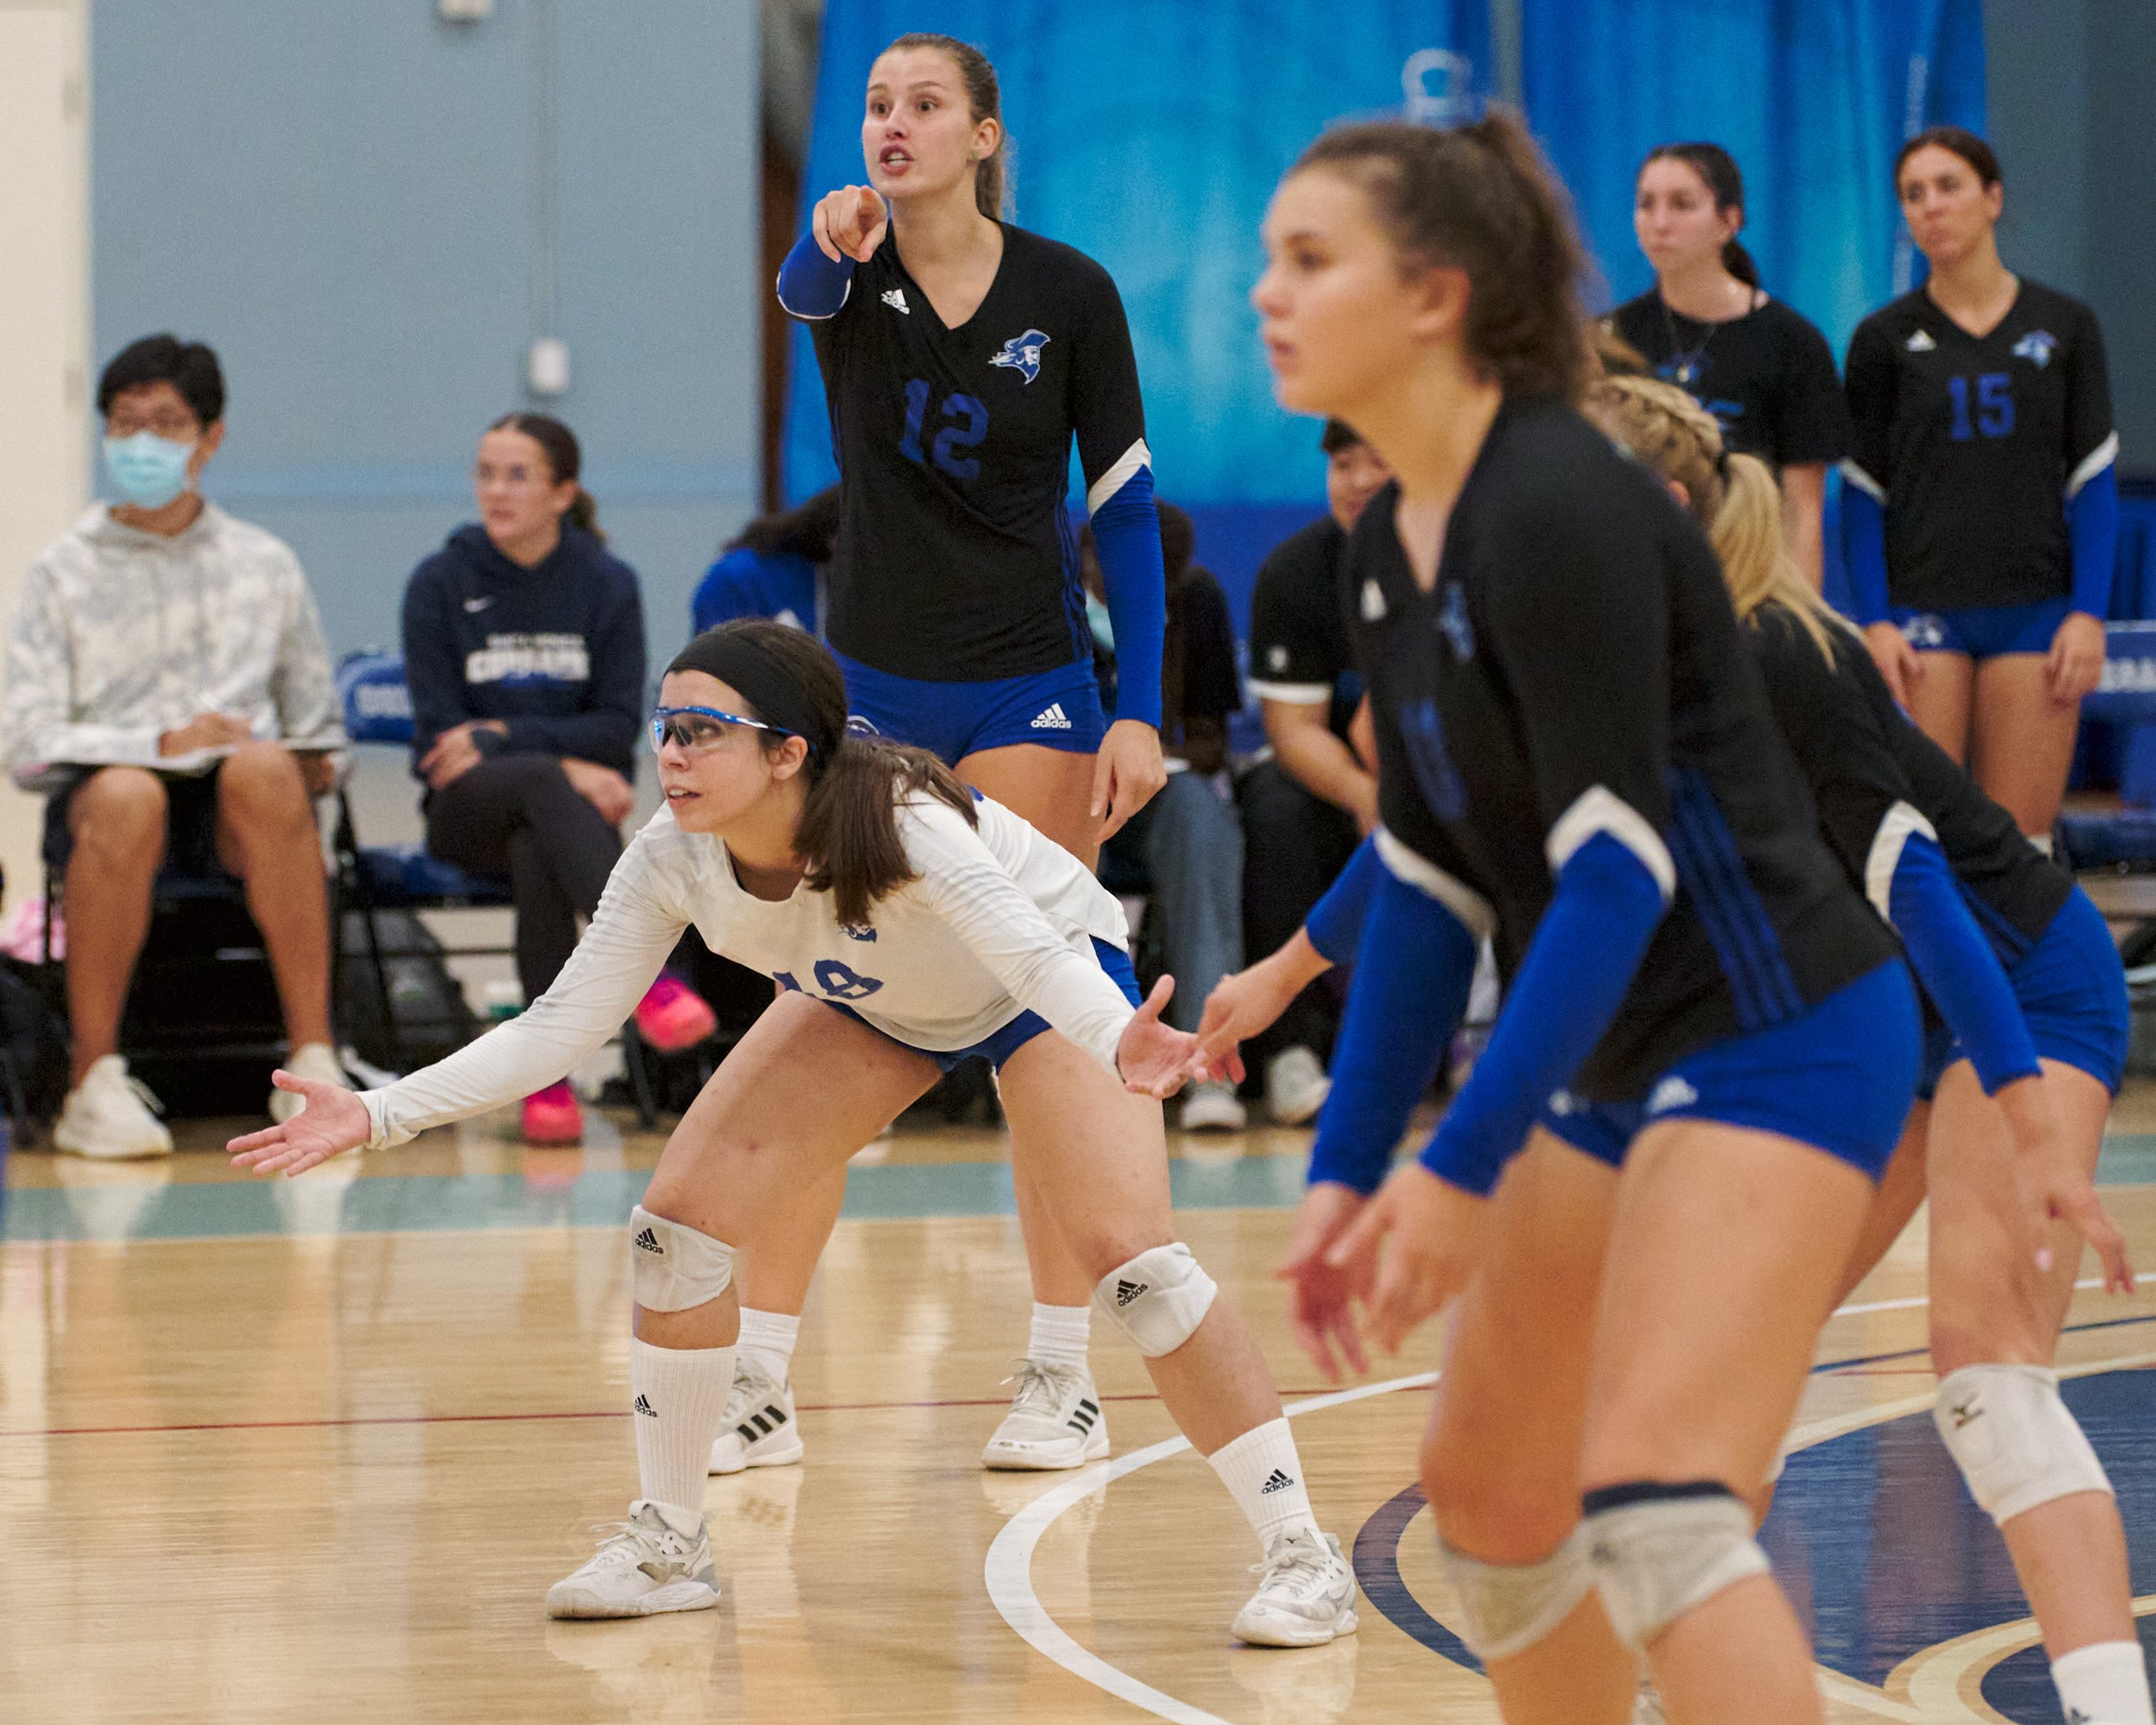  Santa Monica College Corsairs' Rachel Lallemand (squatting), Mia Paulson (12), and Mackenzie Wolff (right) during the women's volleyball match against the Antelope Valley College Marauders on Wednesday, Oct. 12, 2022, at the Corsair Gym in Santa Mon